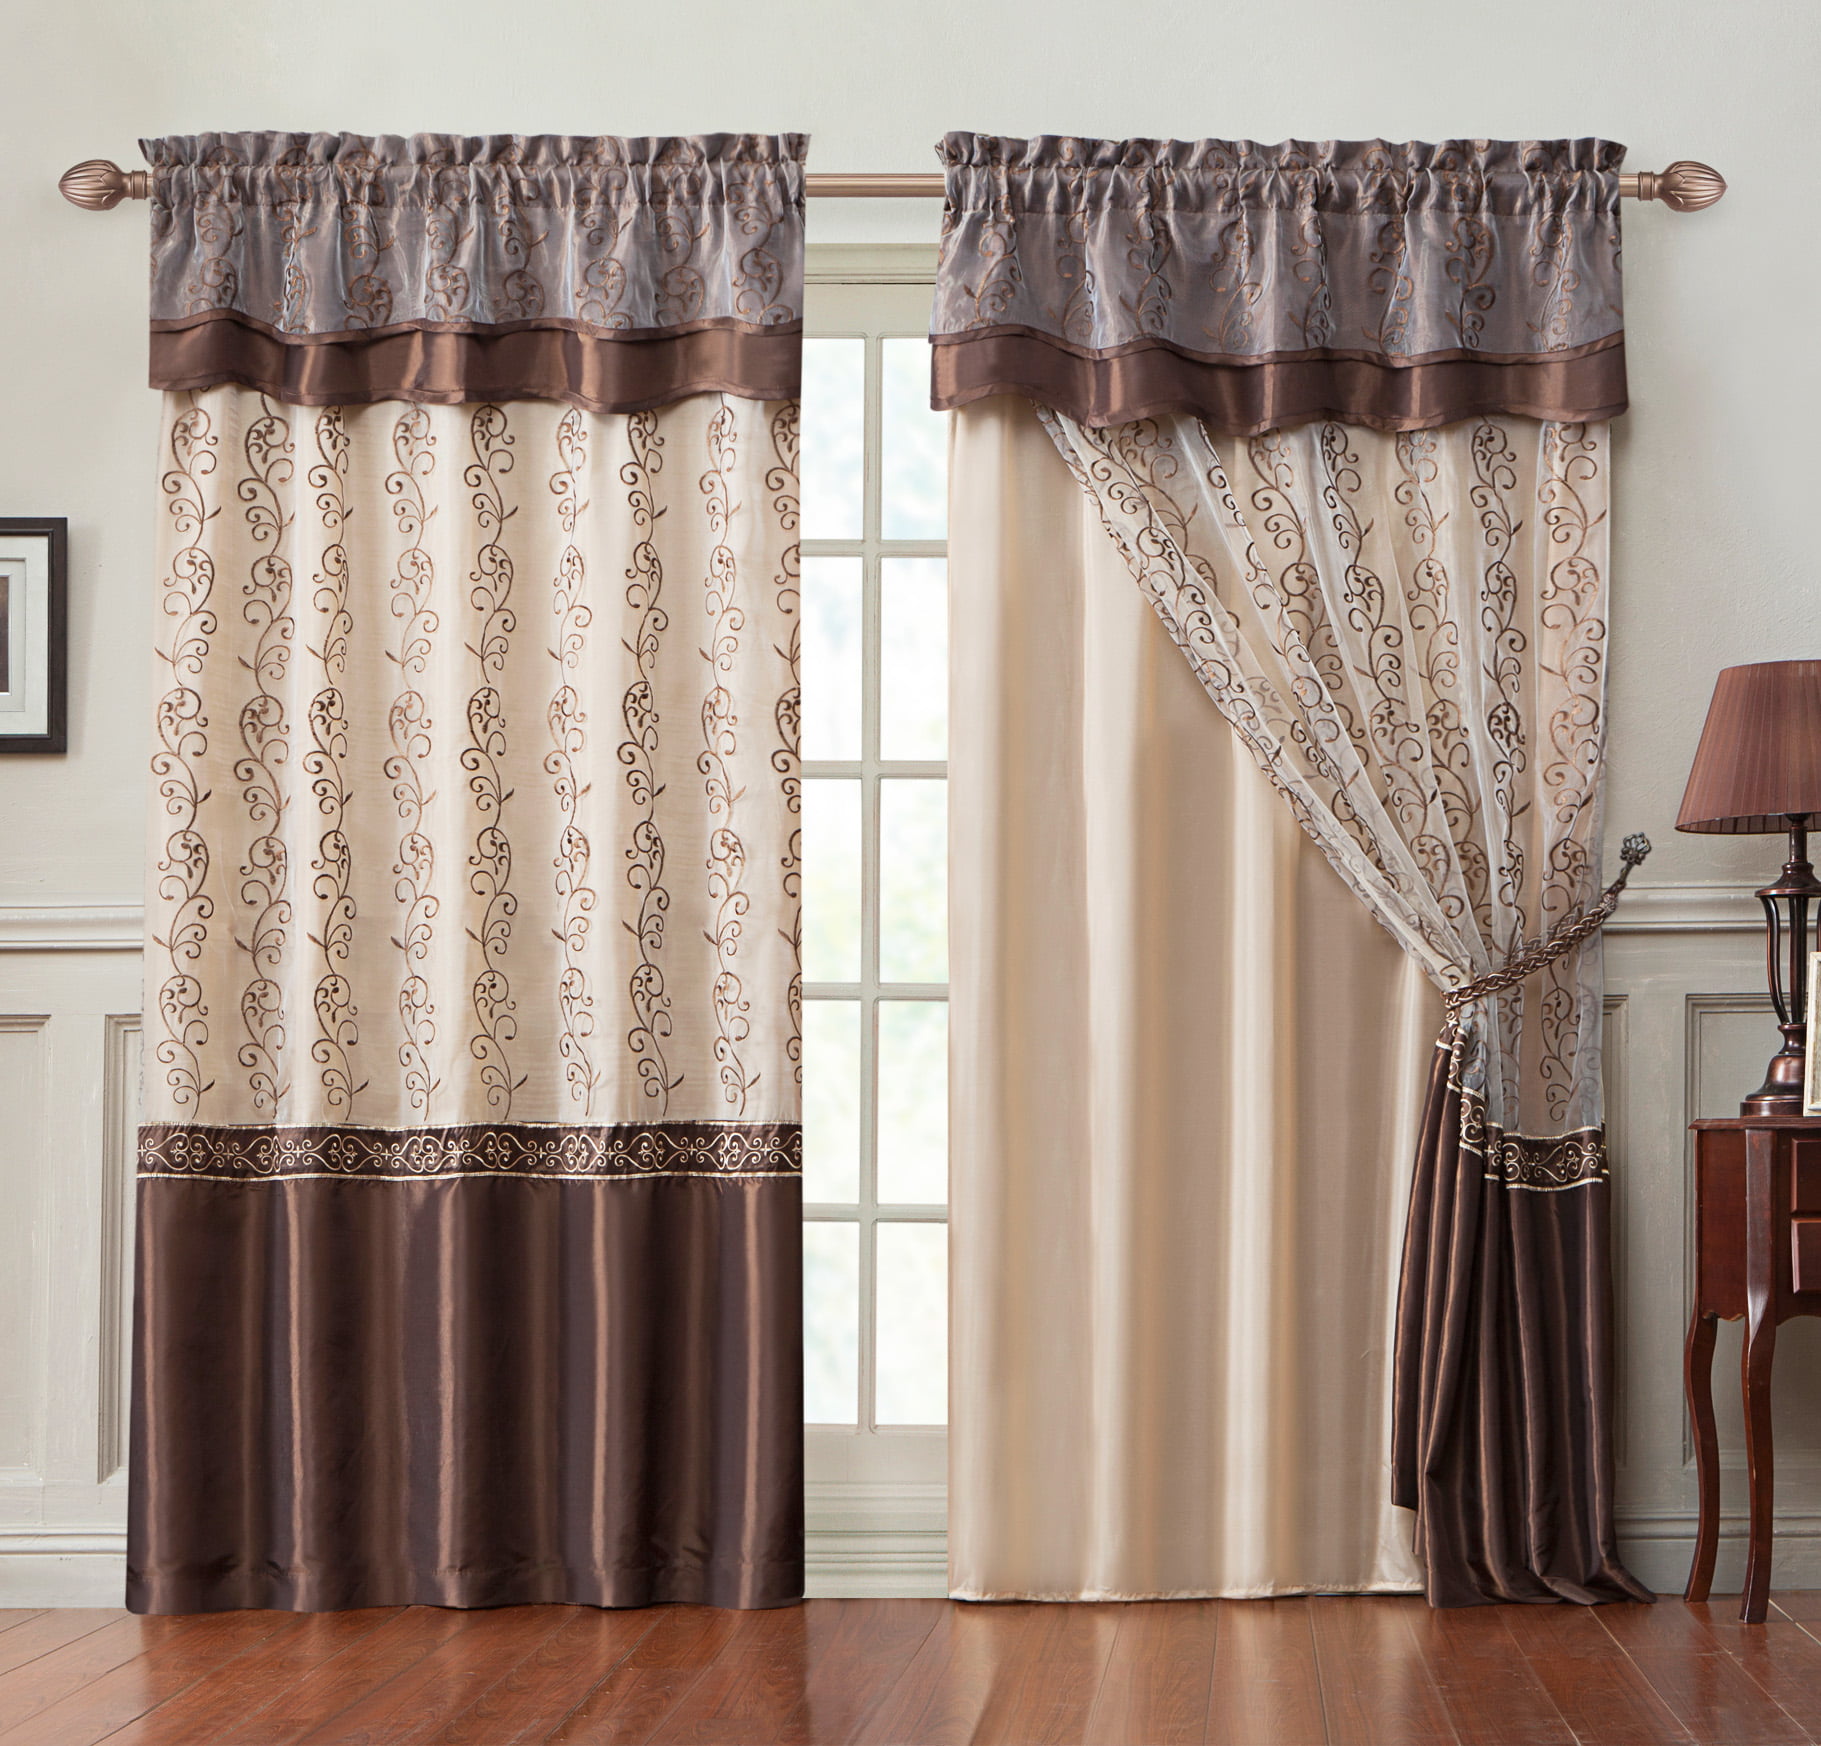 Single 55"W x 90"L 1 Beige Textured Sheer Window Curtain Panel: Embroidered 